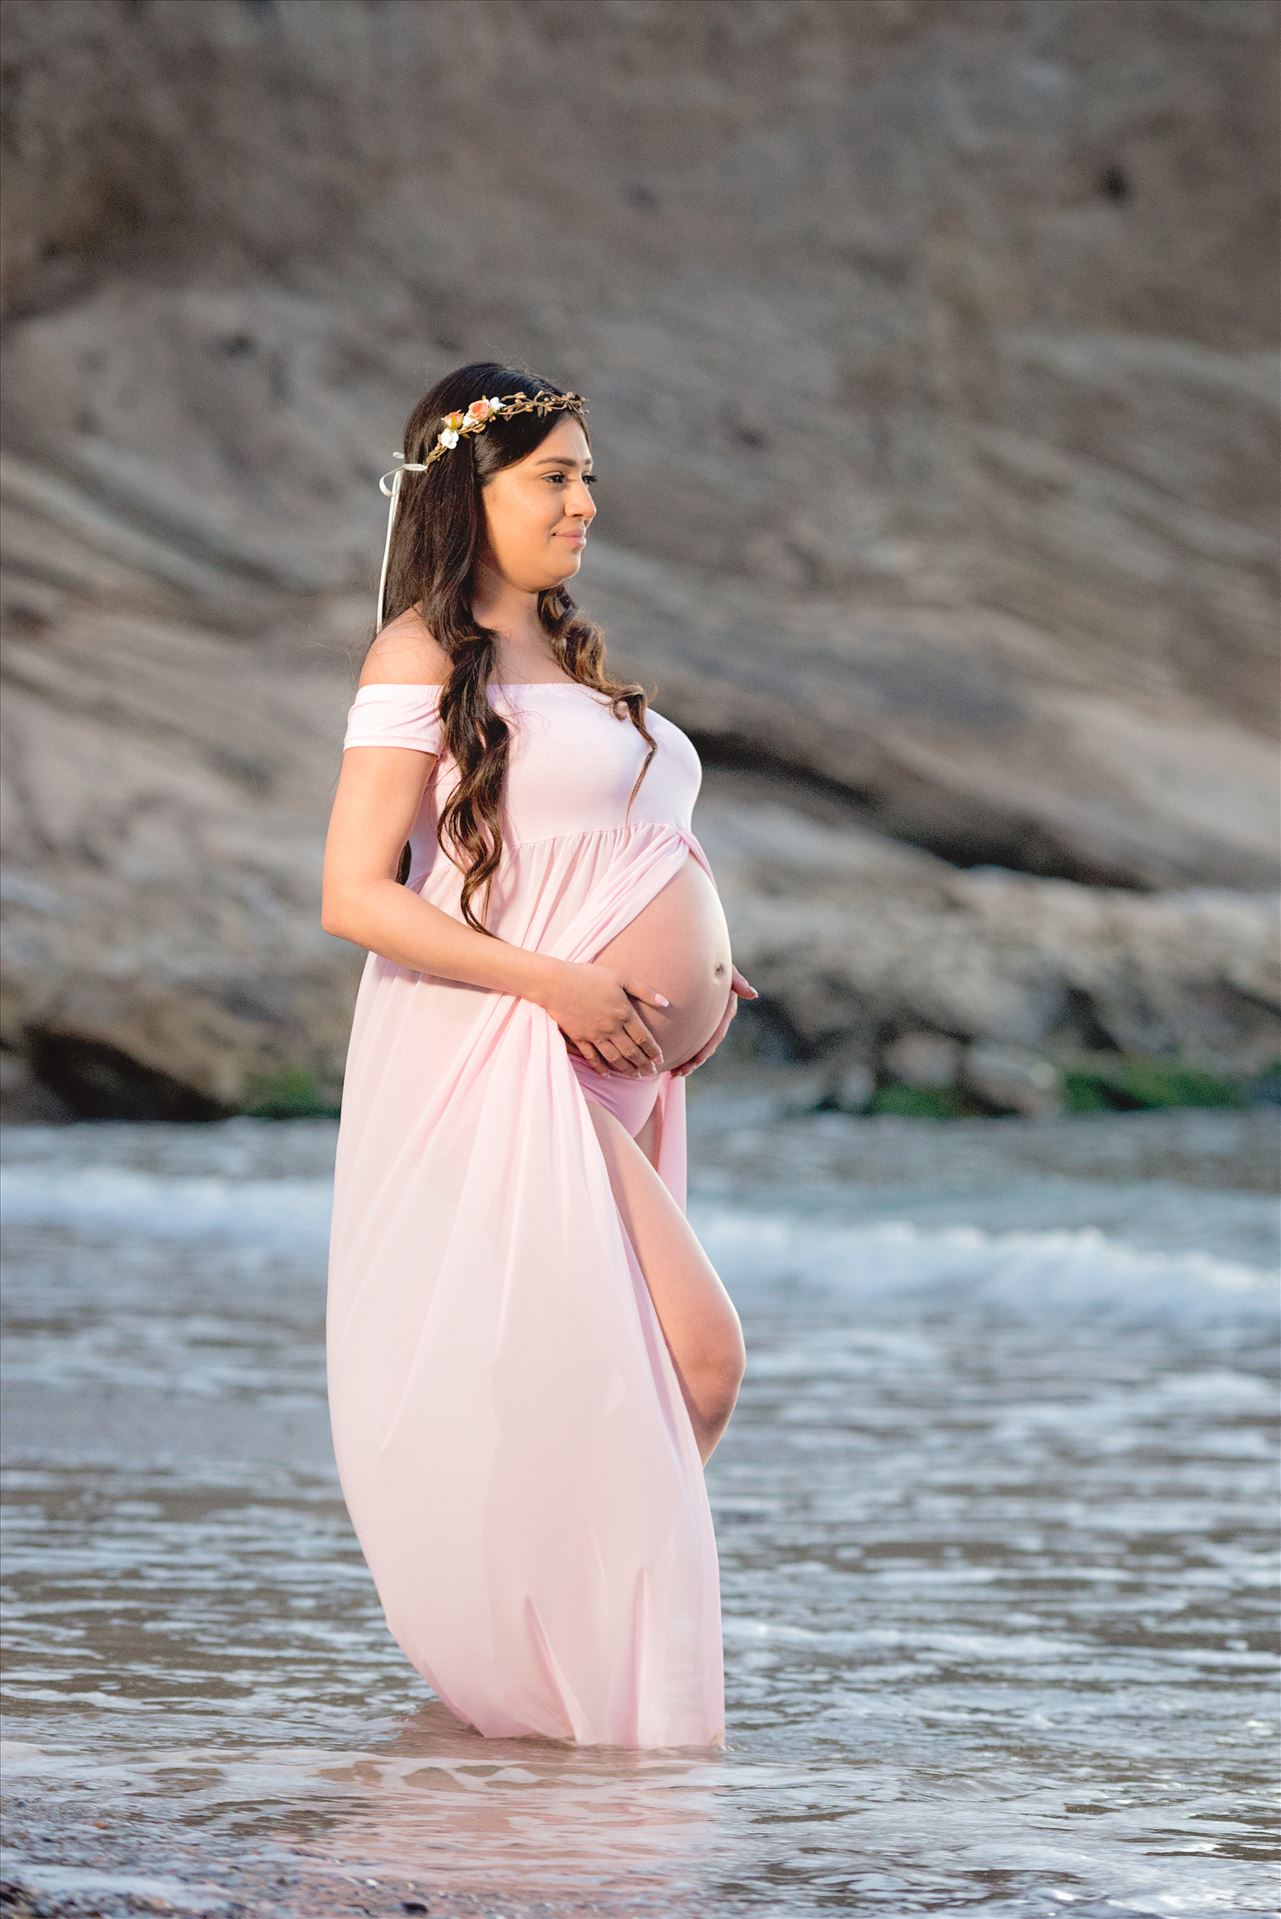 Jessica Maternity Session 30 - Maternity Photography session at Spooner's Cove at Montana de Oro in Los Osos California.  Beach Maternity Session.  New Mother in the Water by Sarah Williams